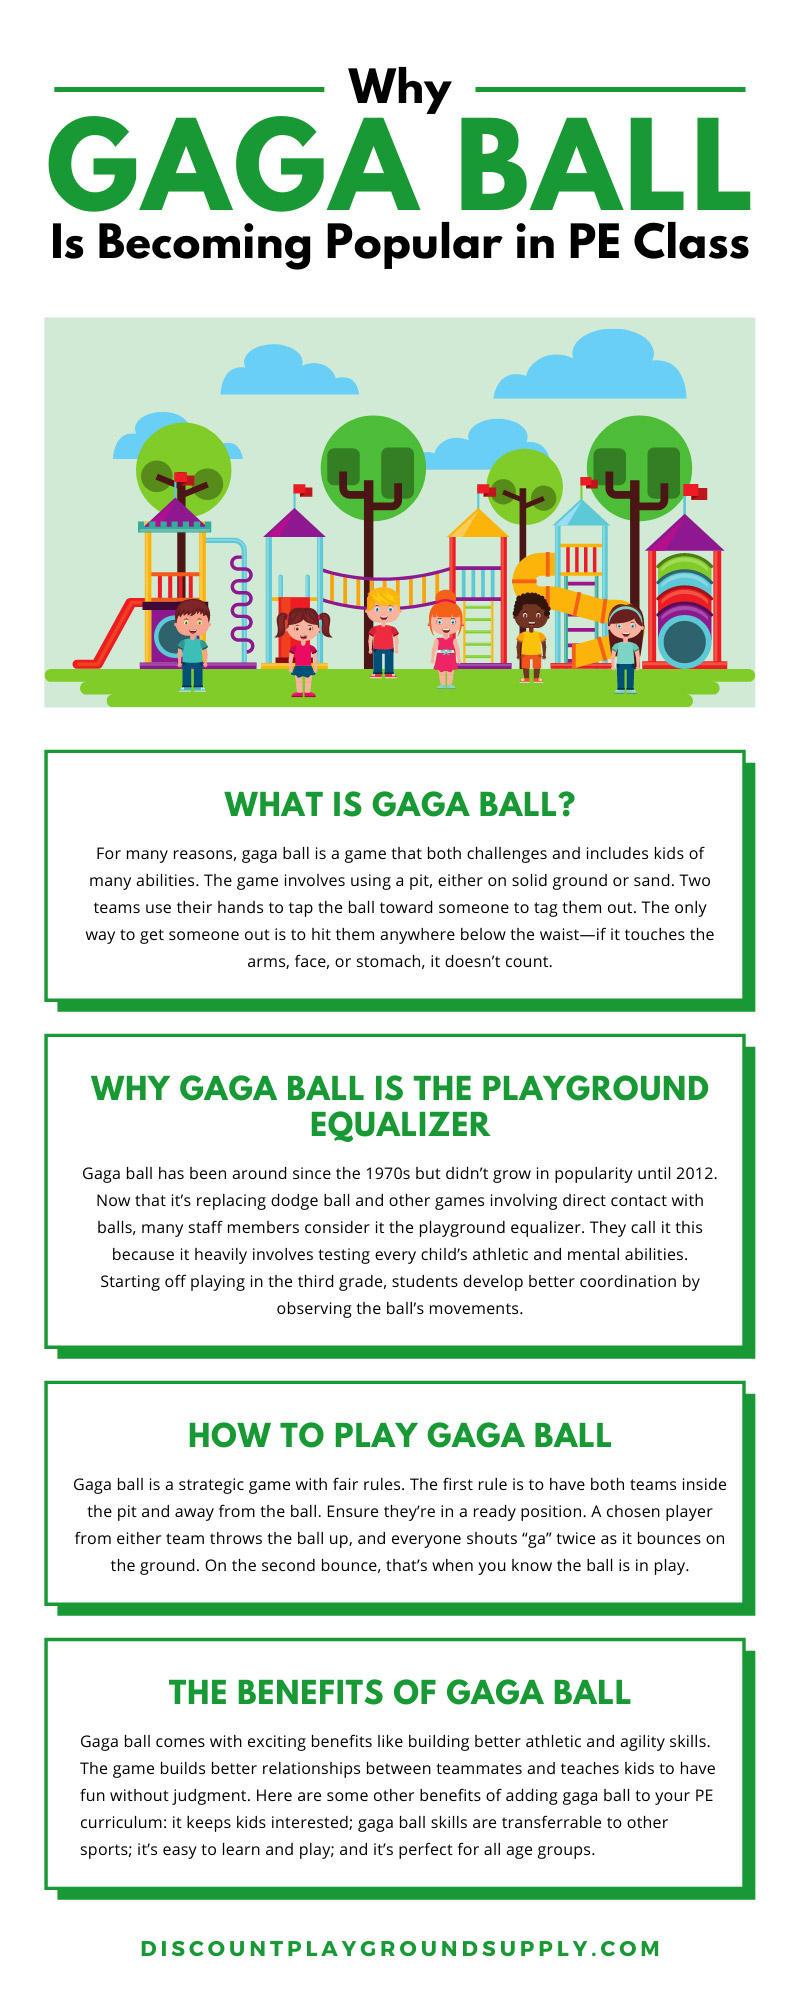 Why Gaga Ball Is Becoming Popular in PE Class